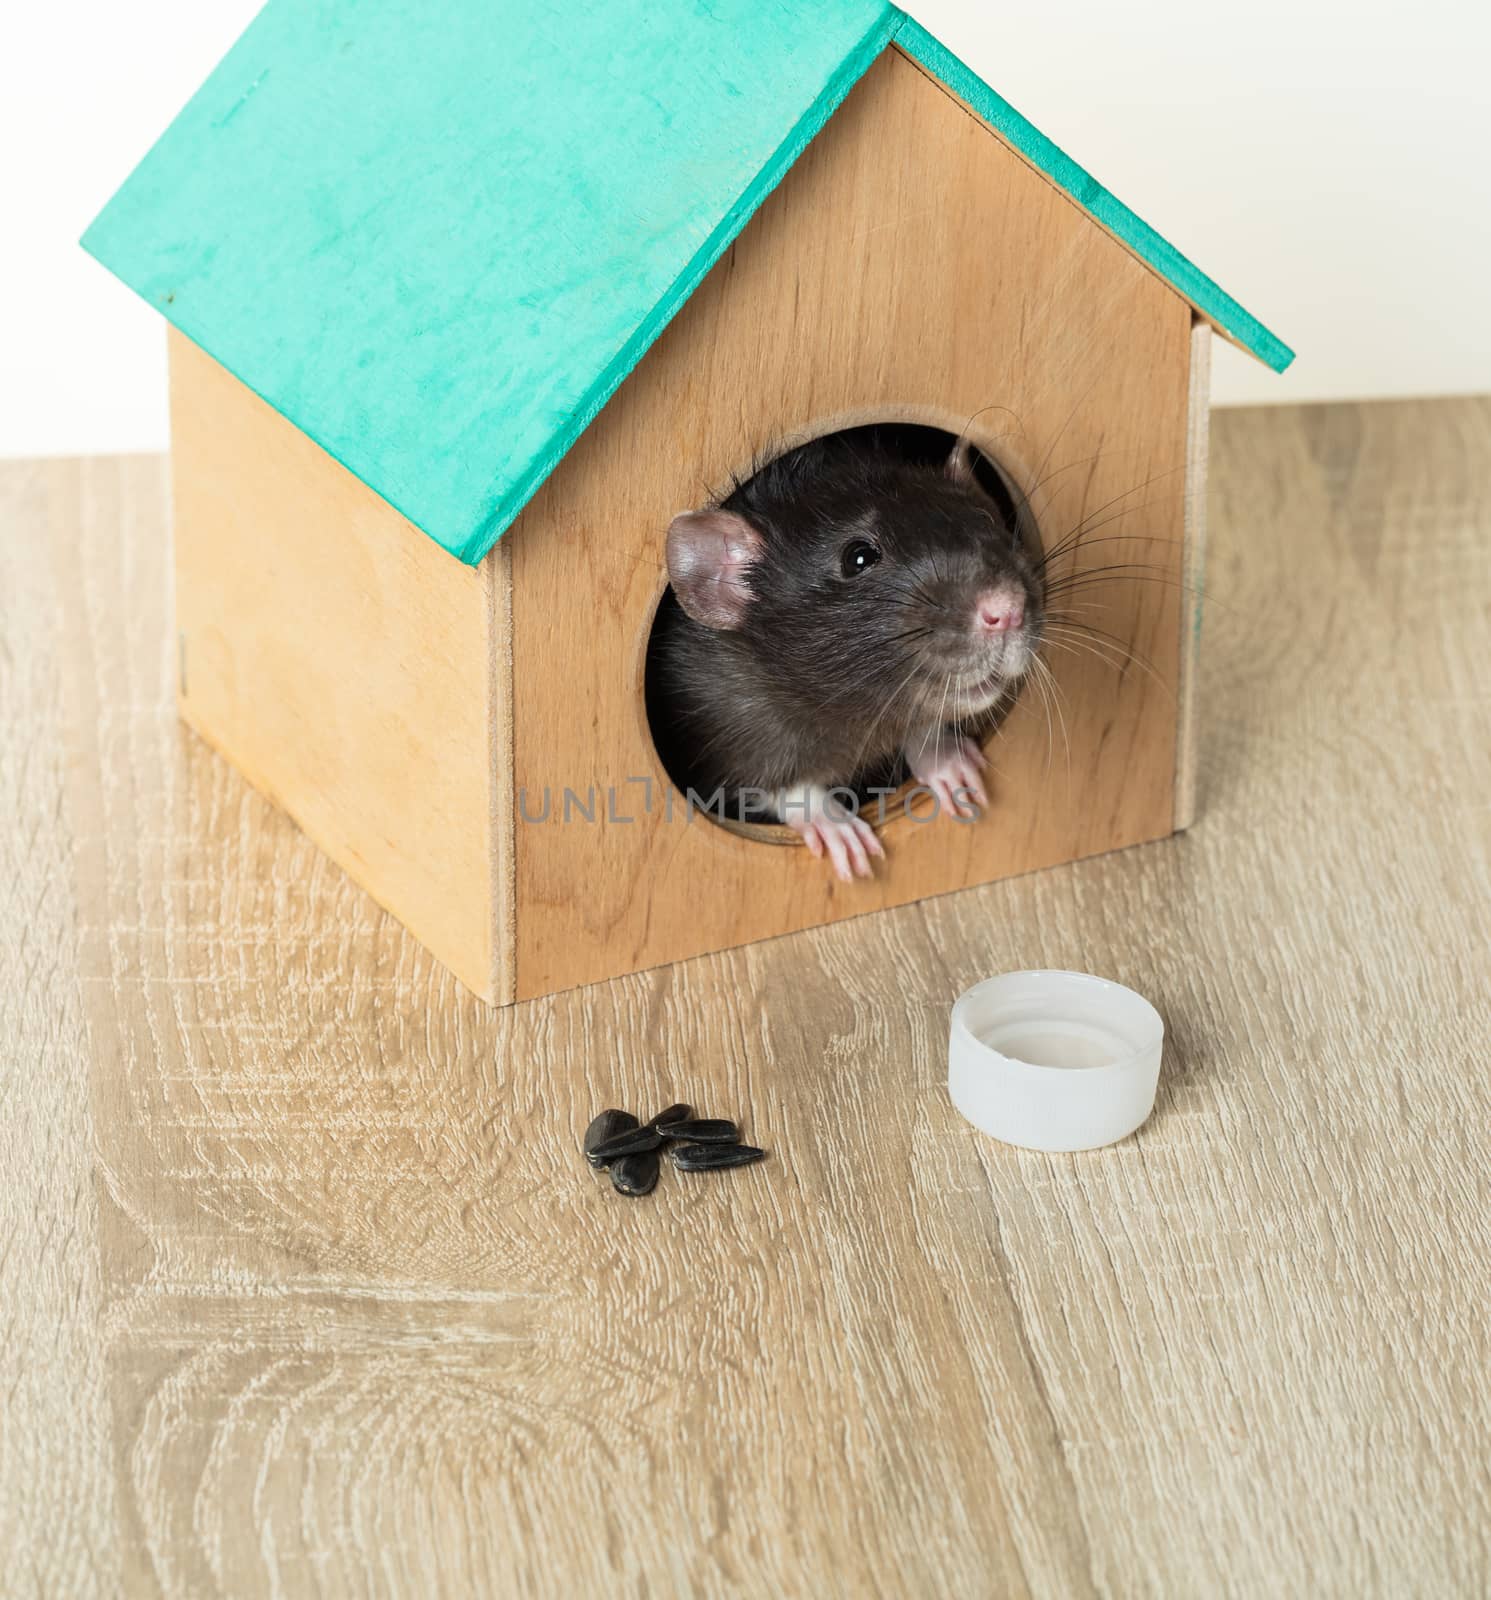 Gray rat peeps out of a wooden house